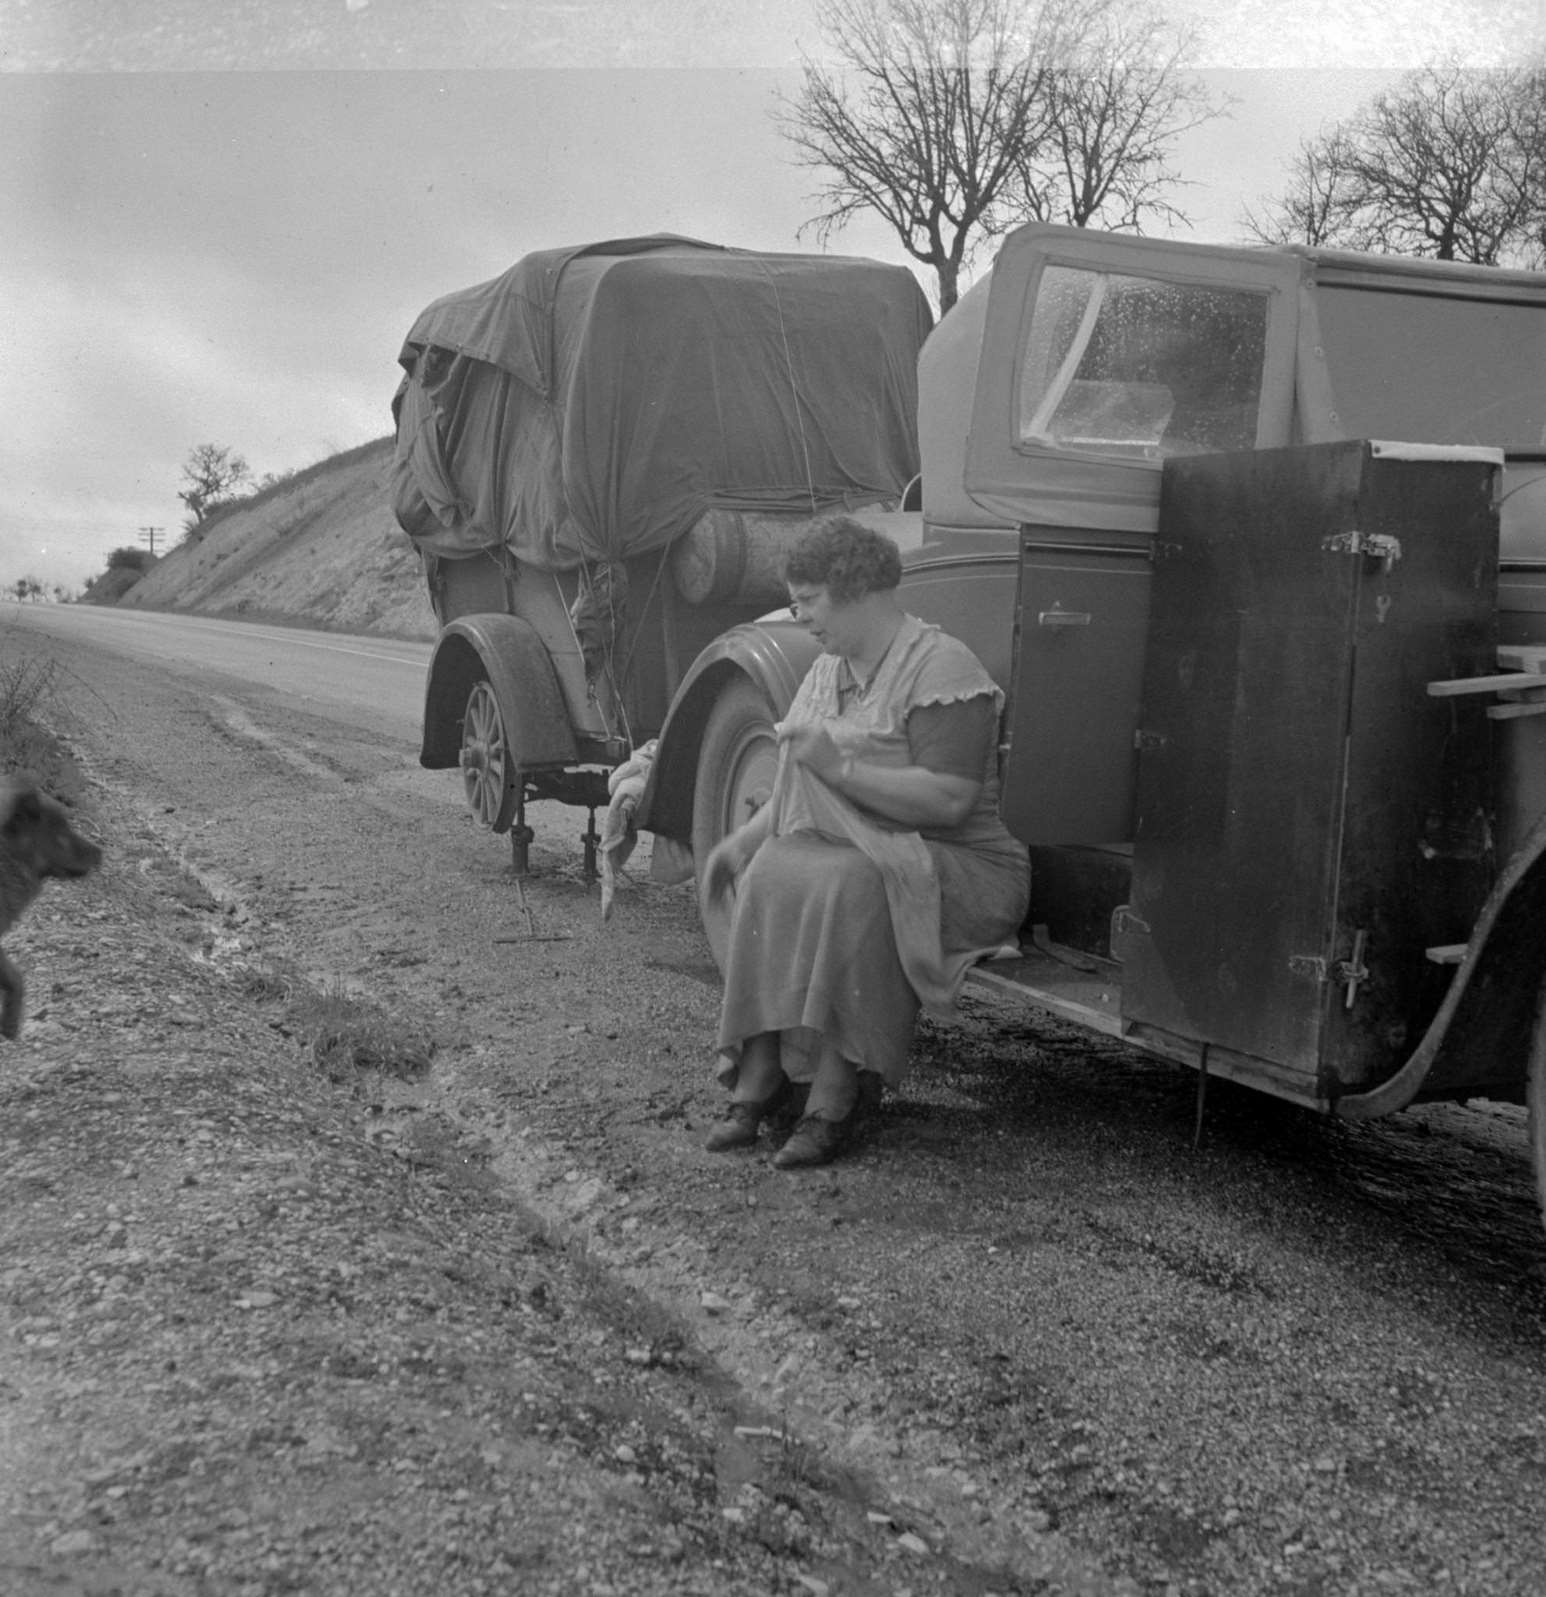 Migrant pea workers on the road. All their worldly possessions in car and trailer, 1930s